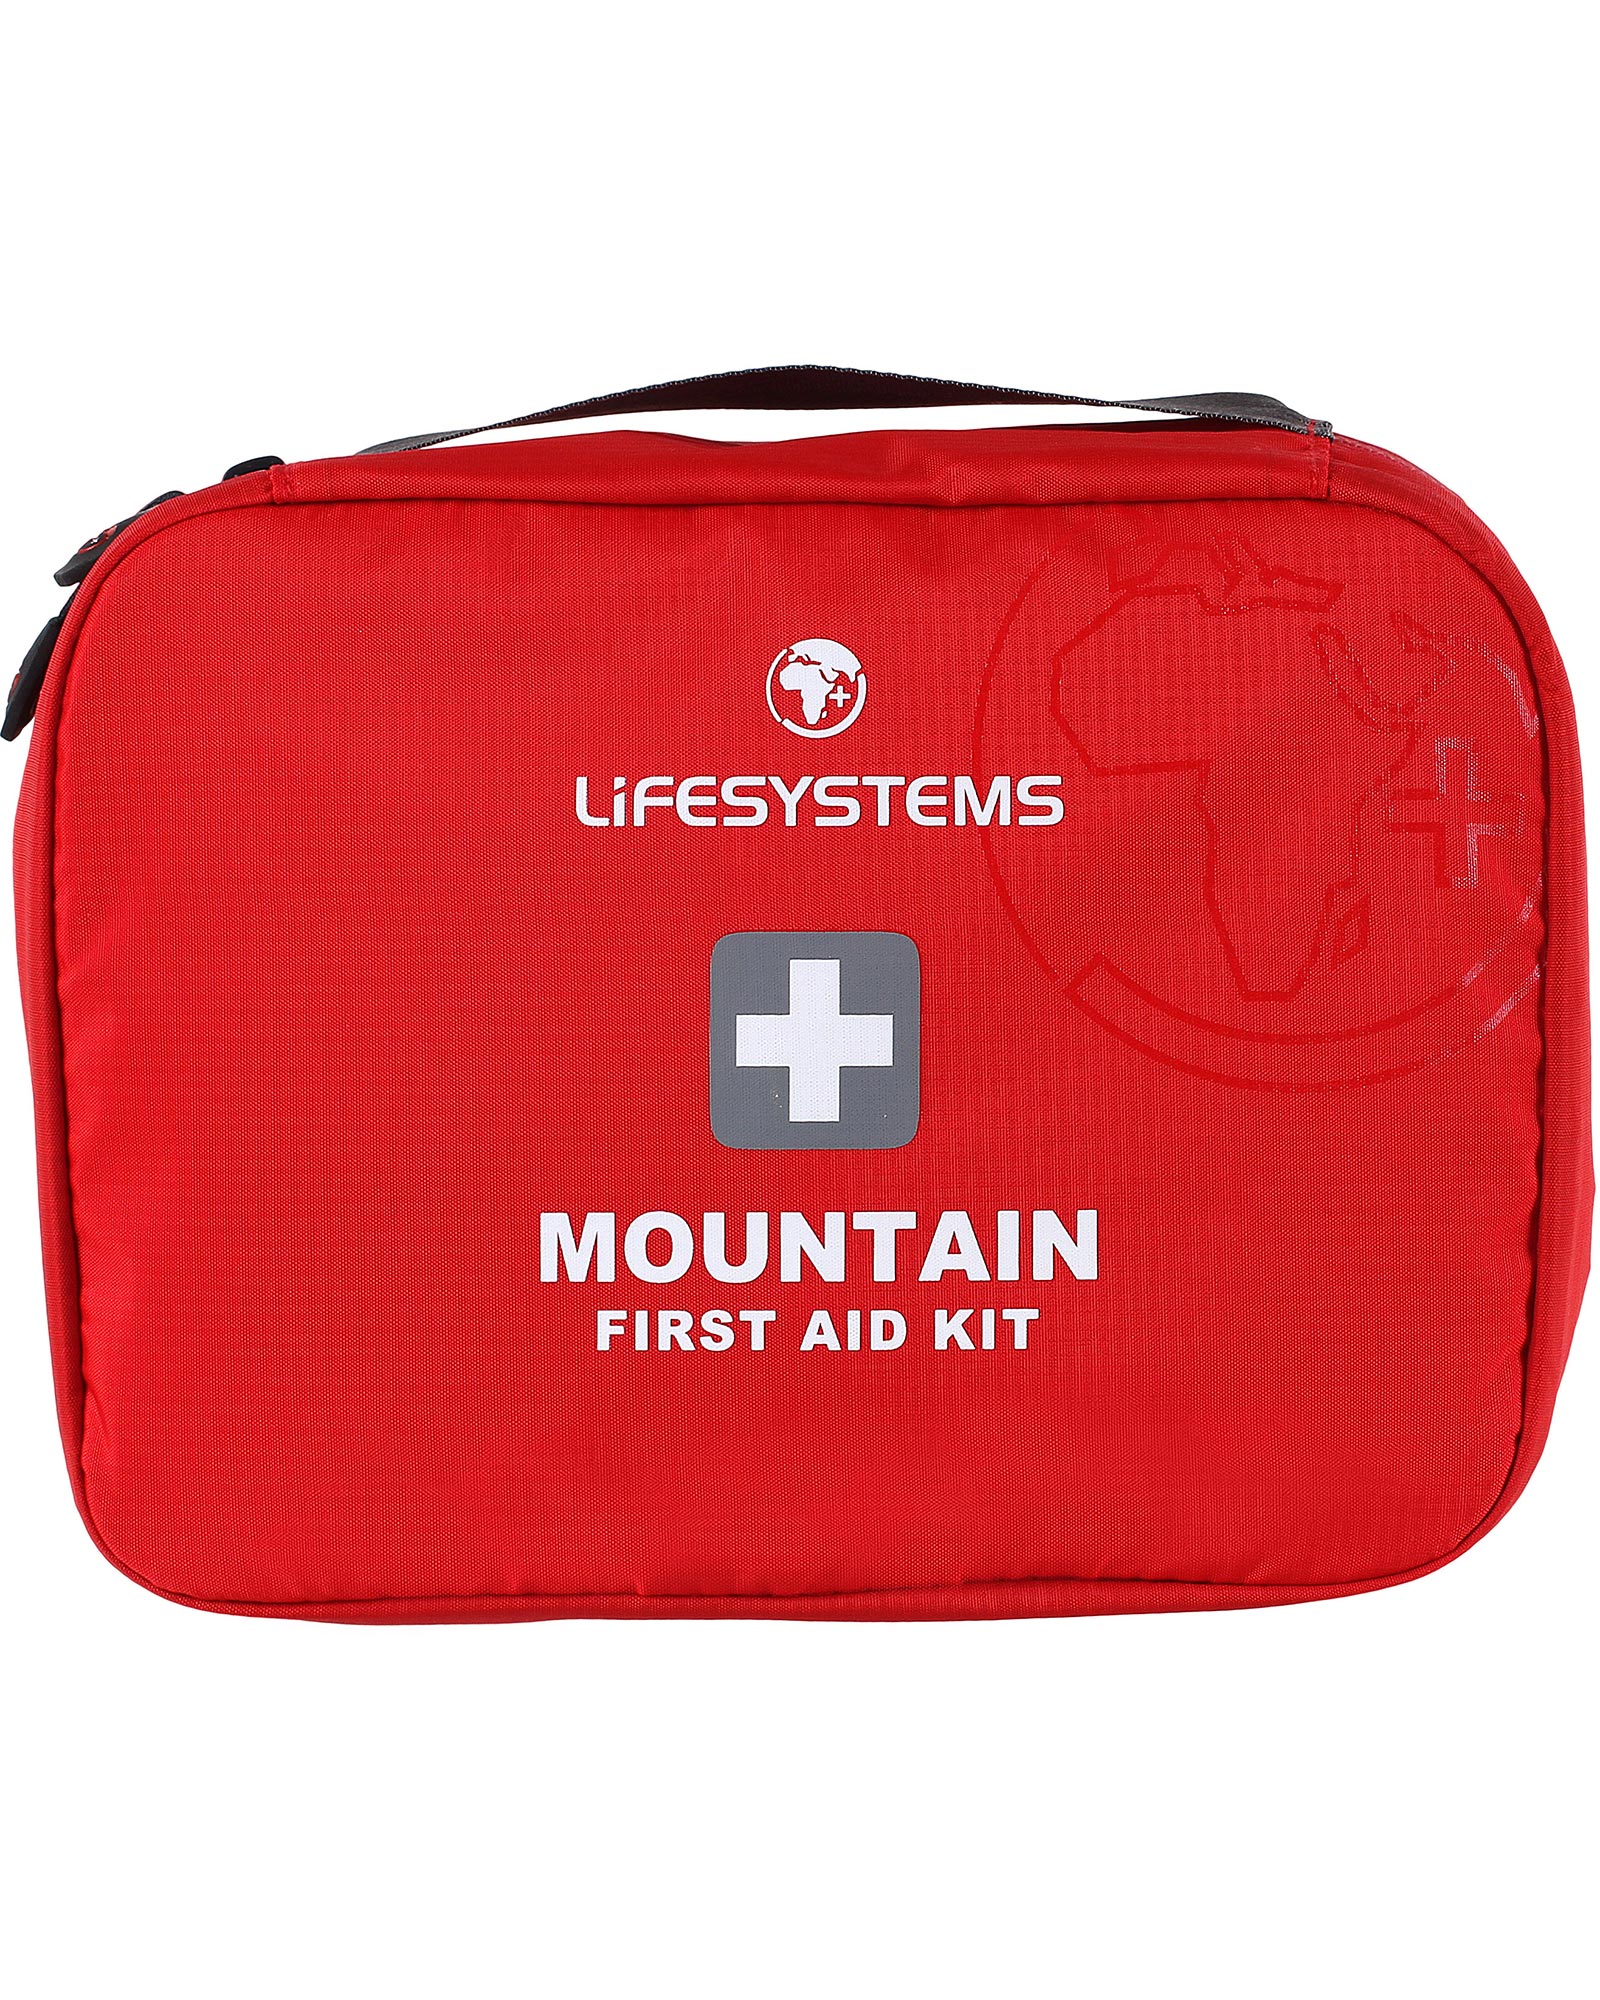 Product image of Lifesystems Mountain First Aid Kit